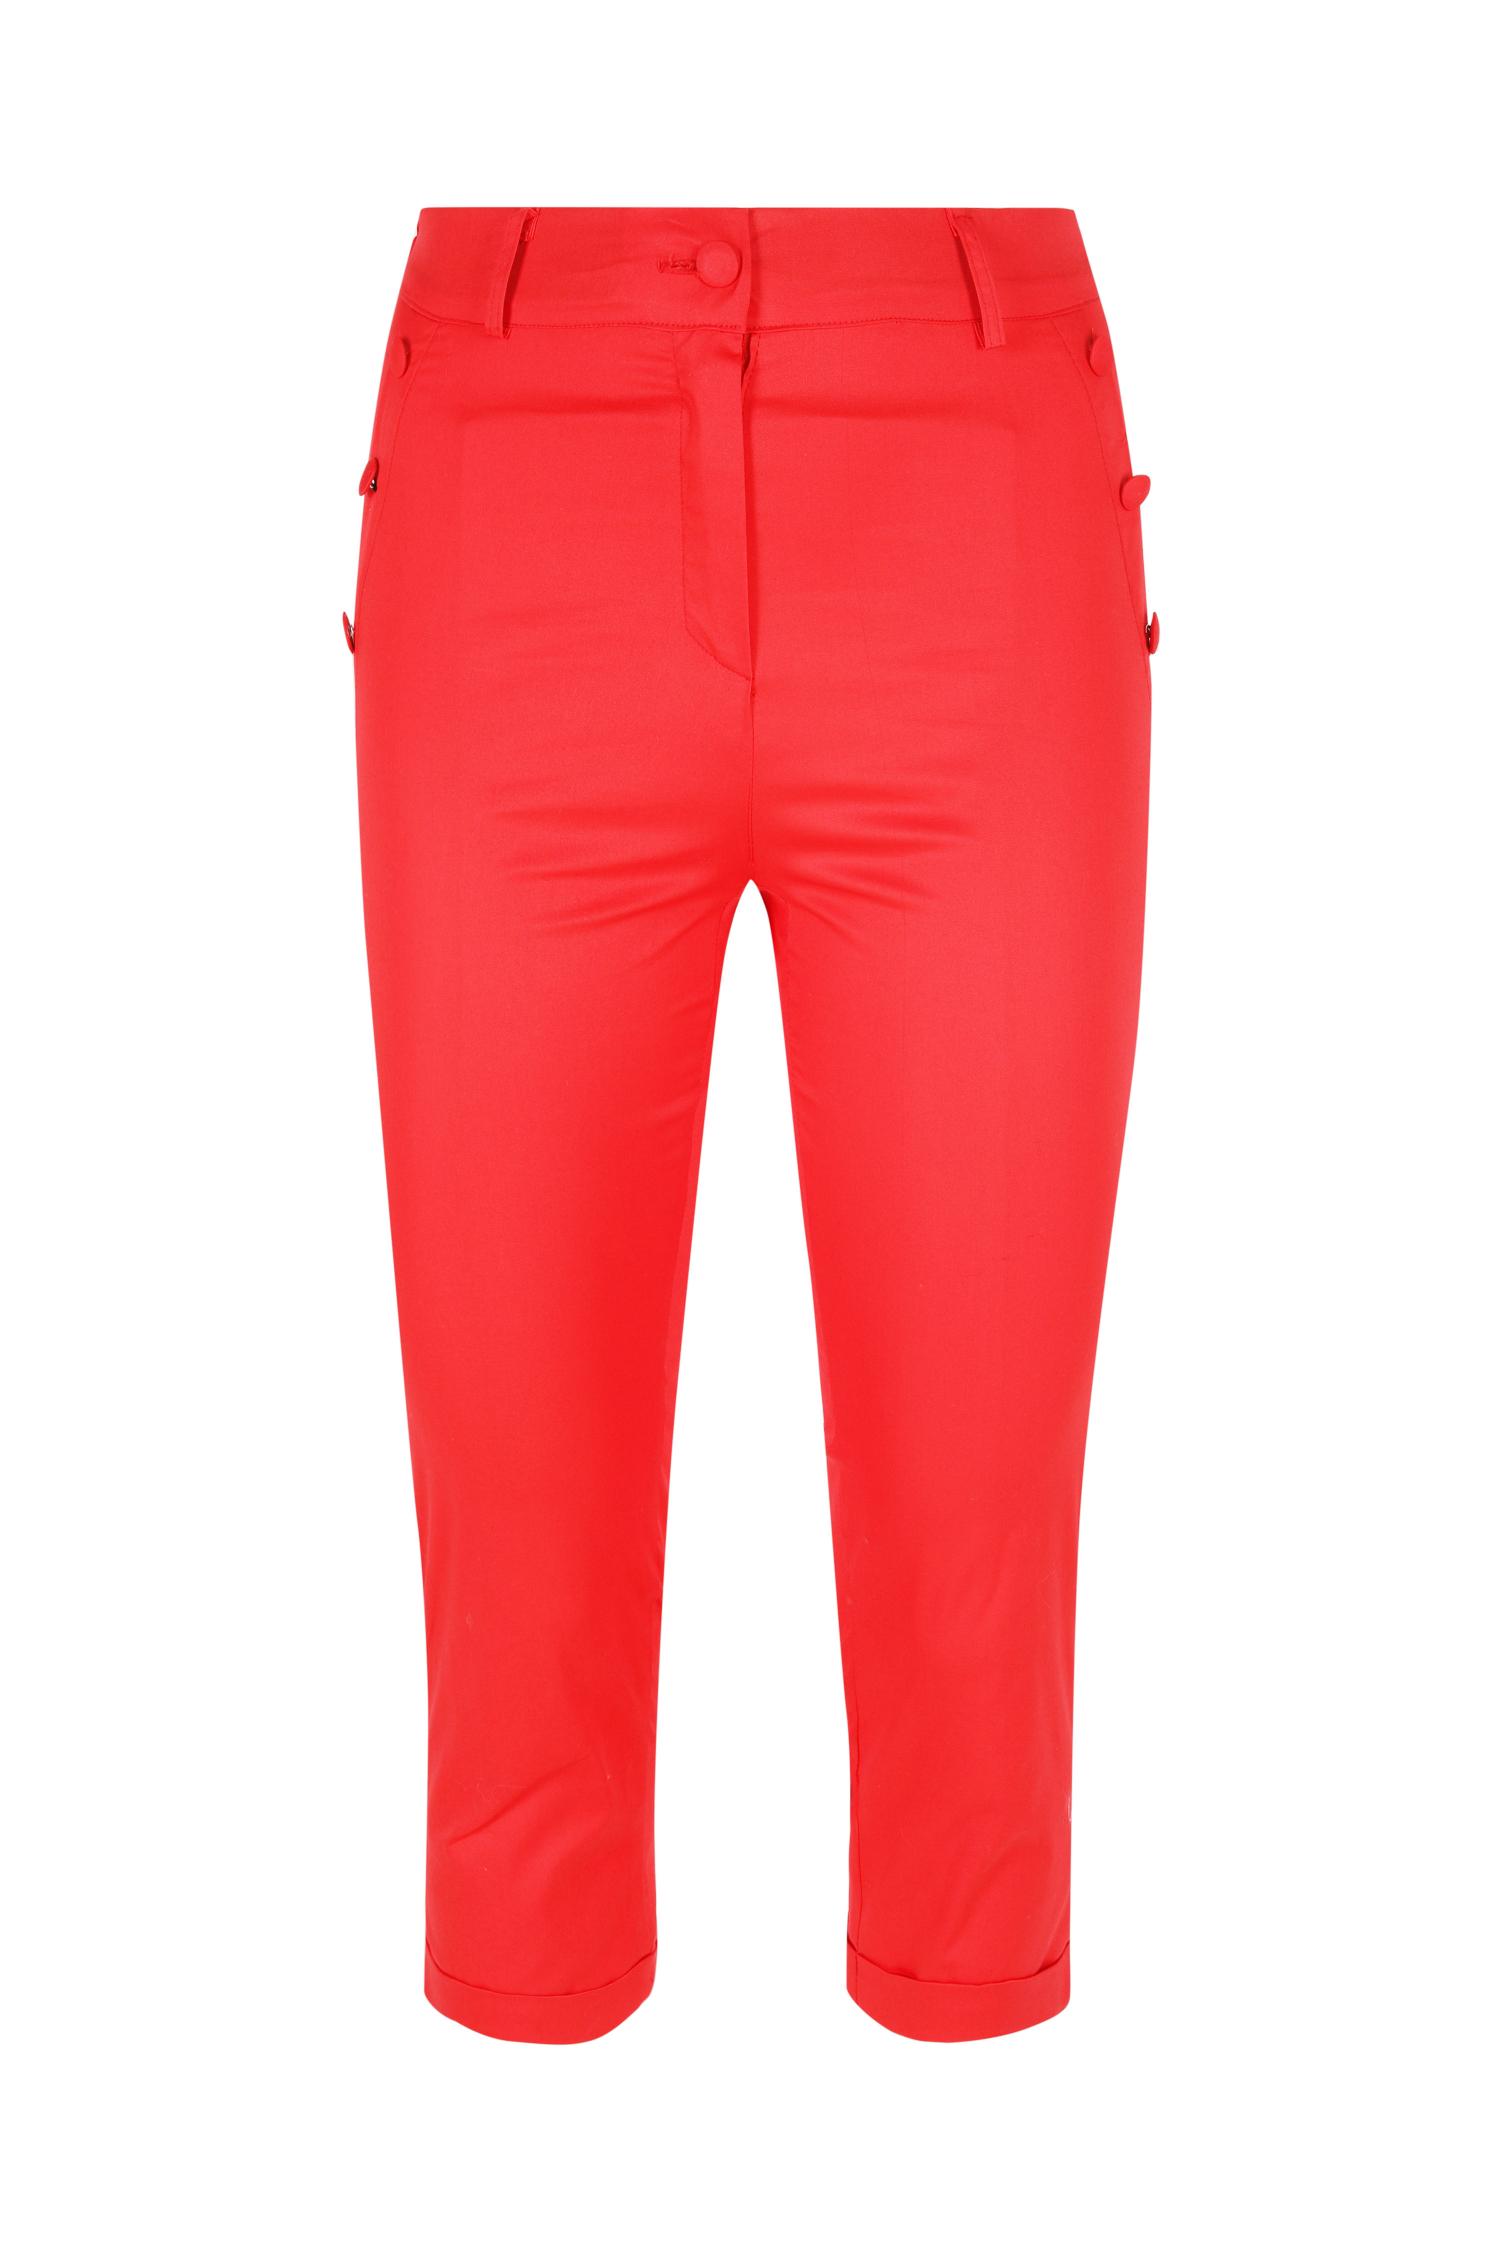 plain 7/8 trousers with Italian pocket effect